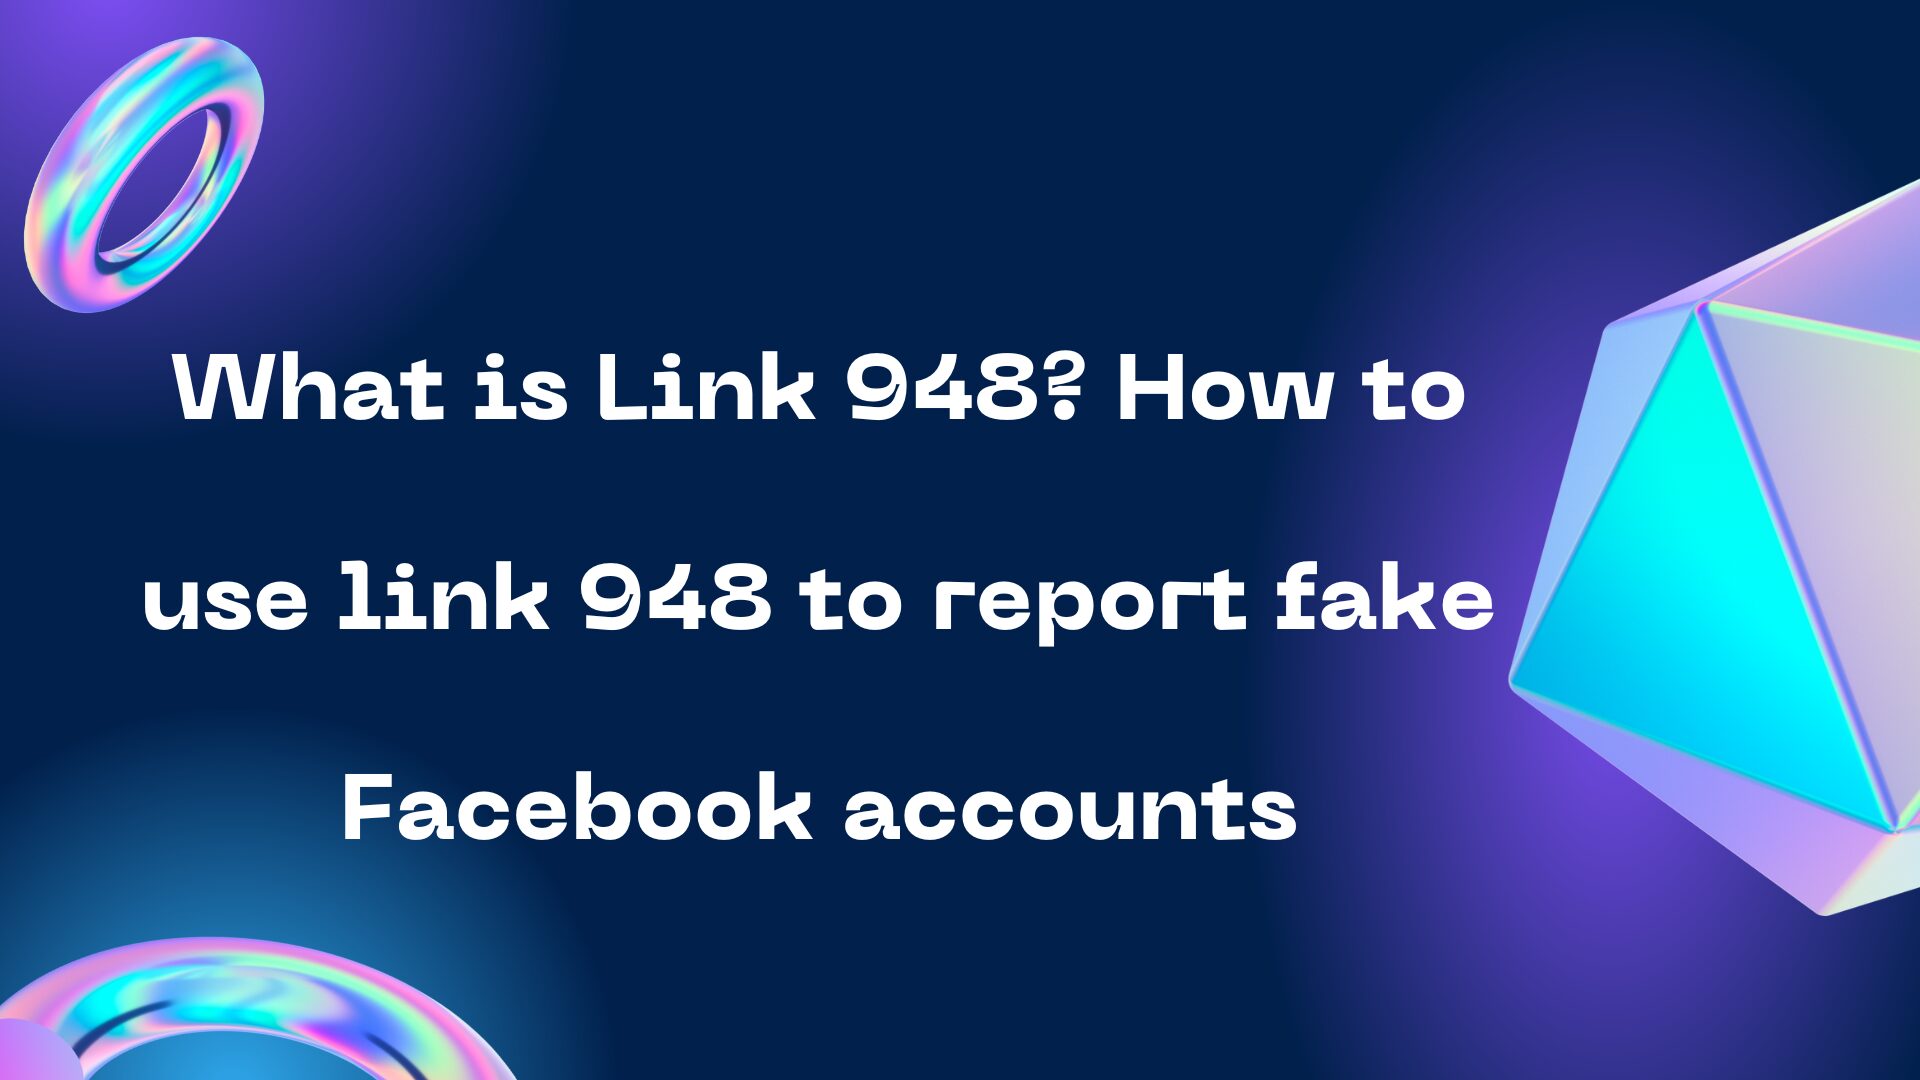 What is Link 948?